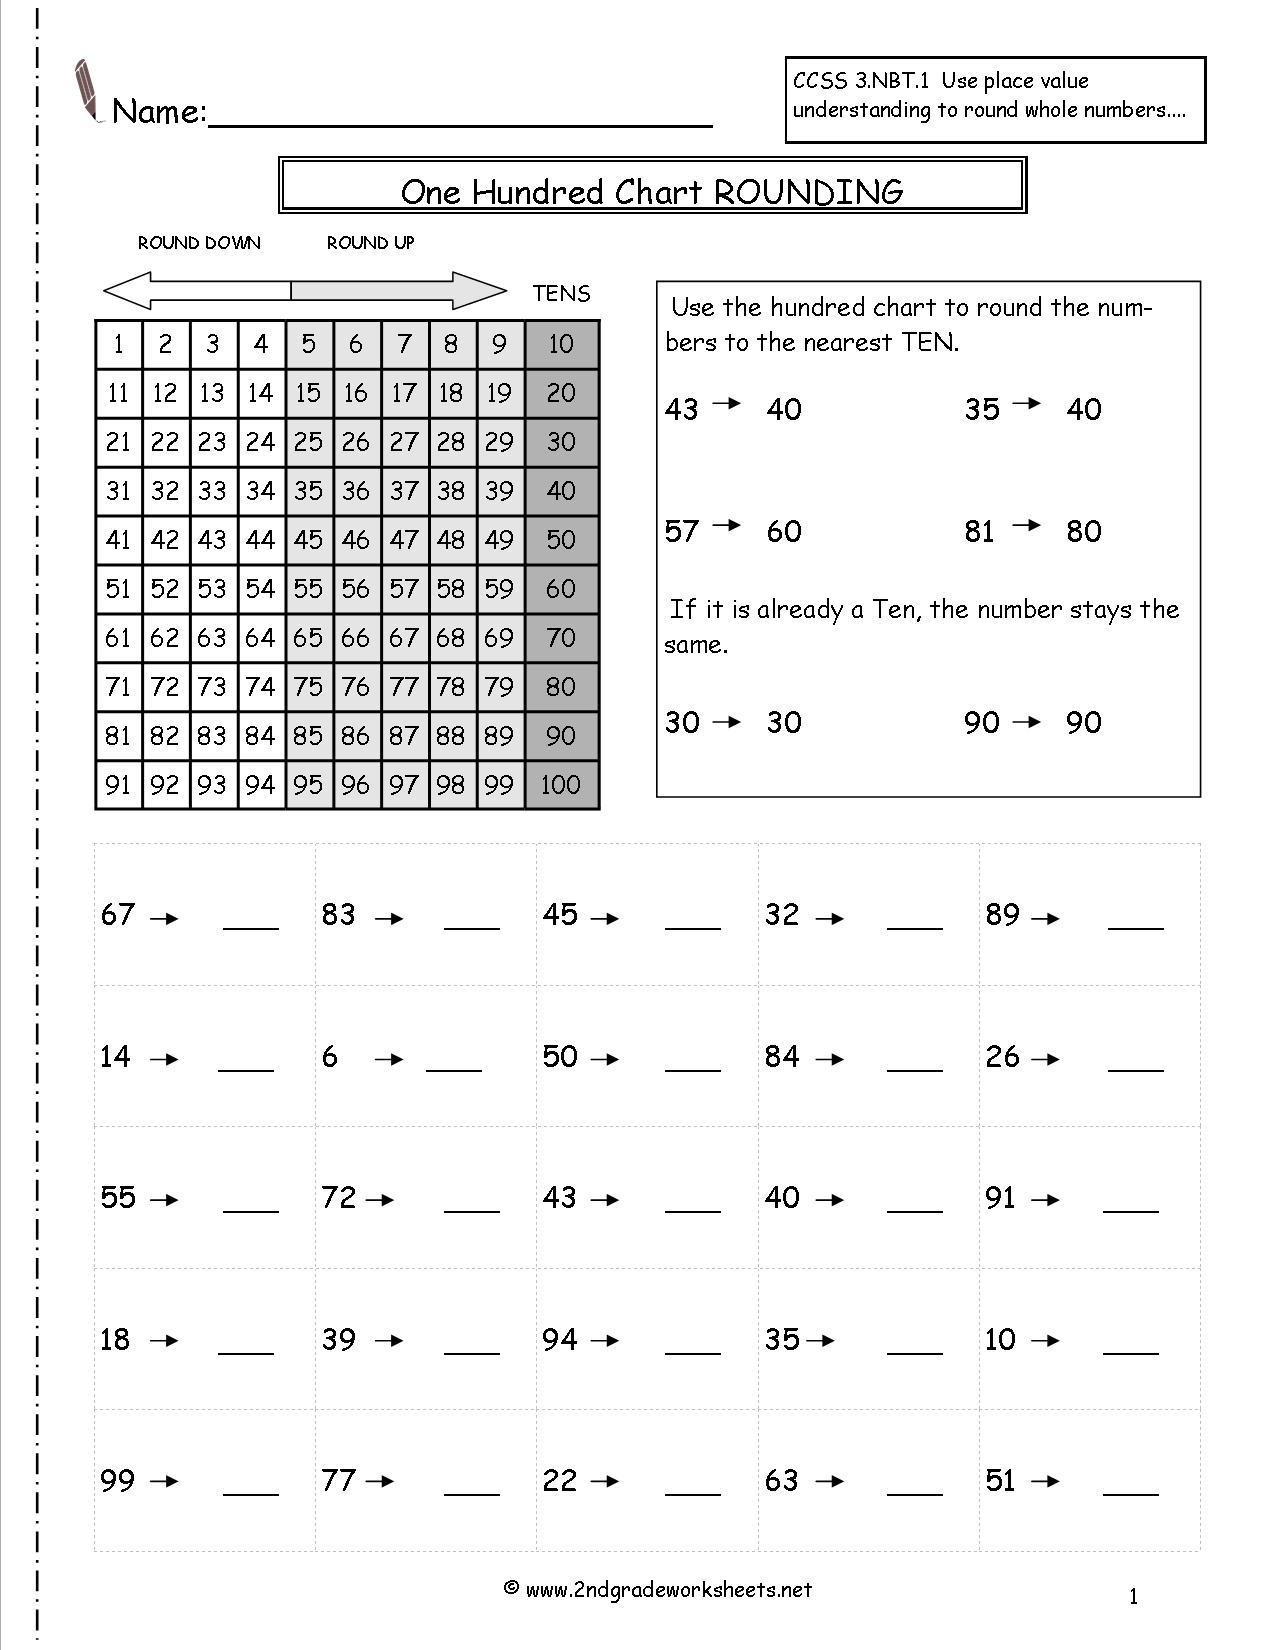 Rounding Whole Numbers Worksheets Image